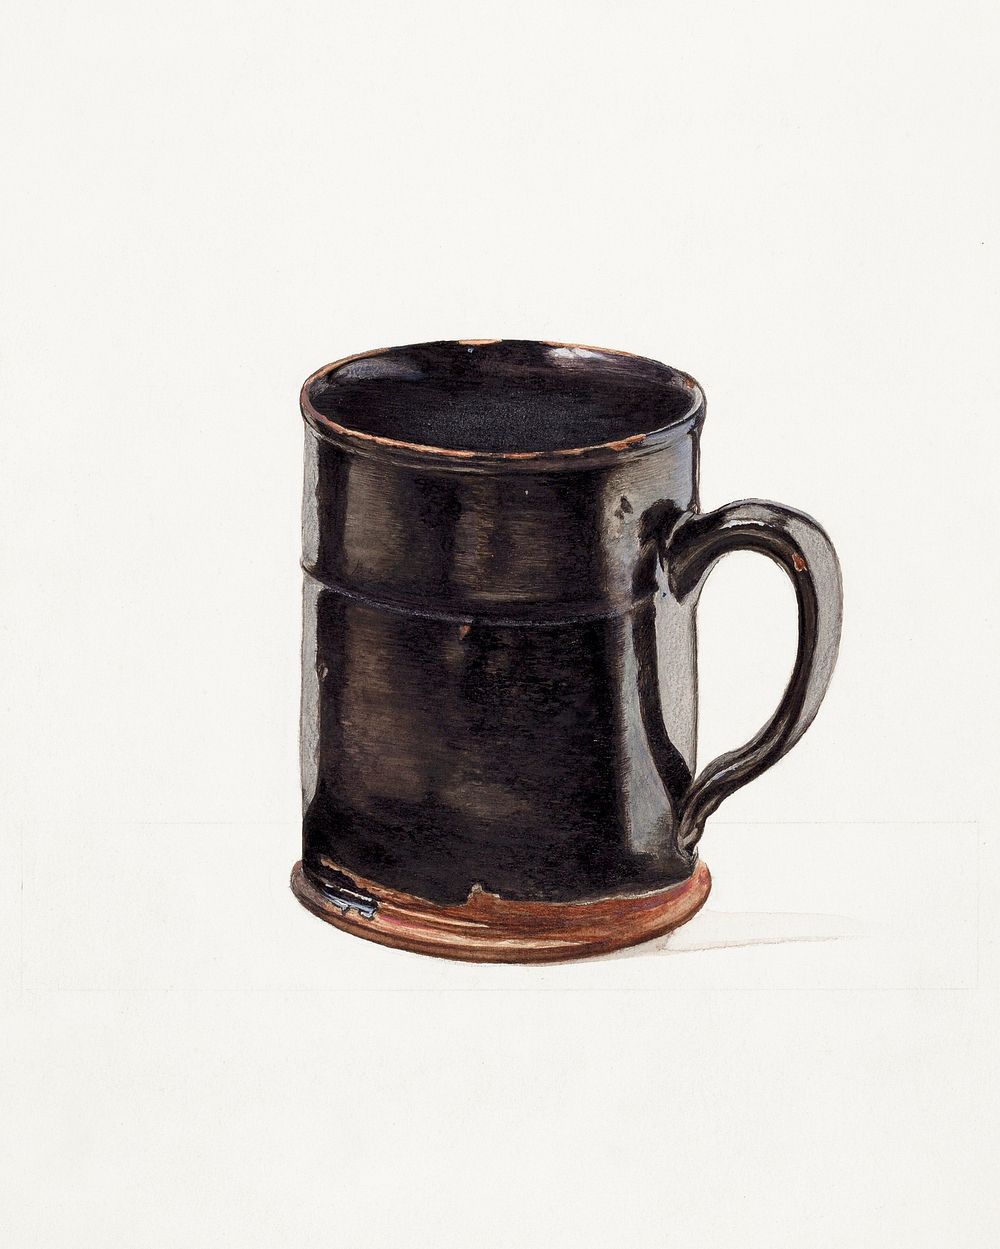 Tall Drinking Mug (1935&ndash;1942) by unknown American 20th Century artist. Original from The National Gallery of Art.…